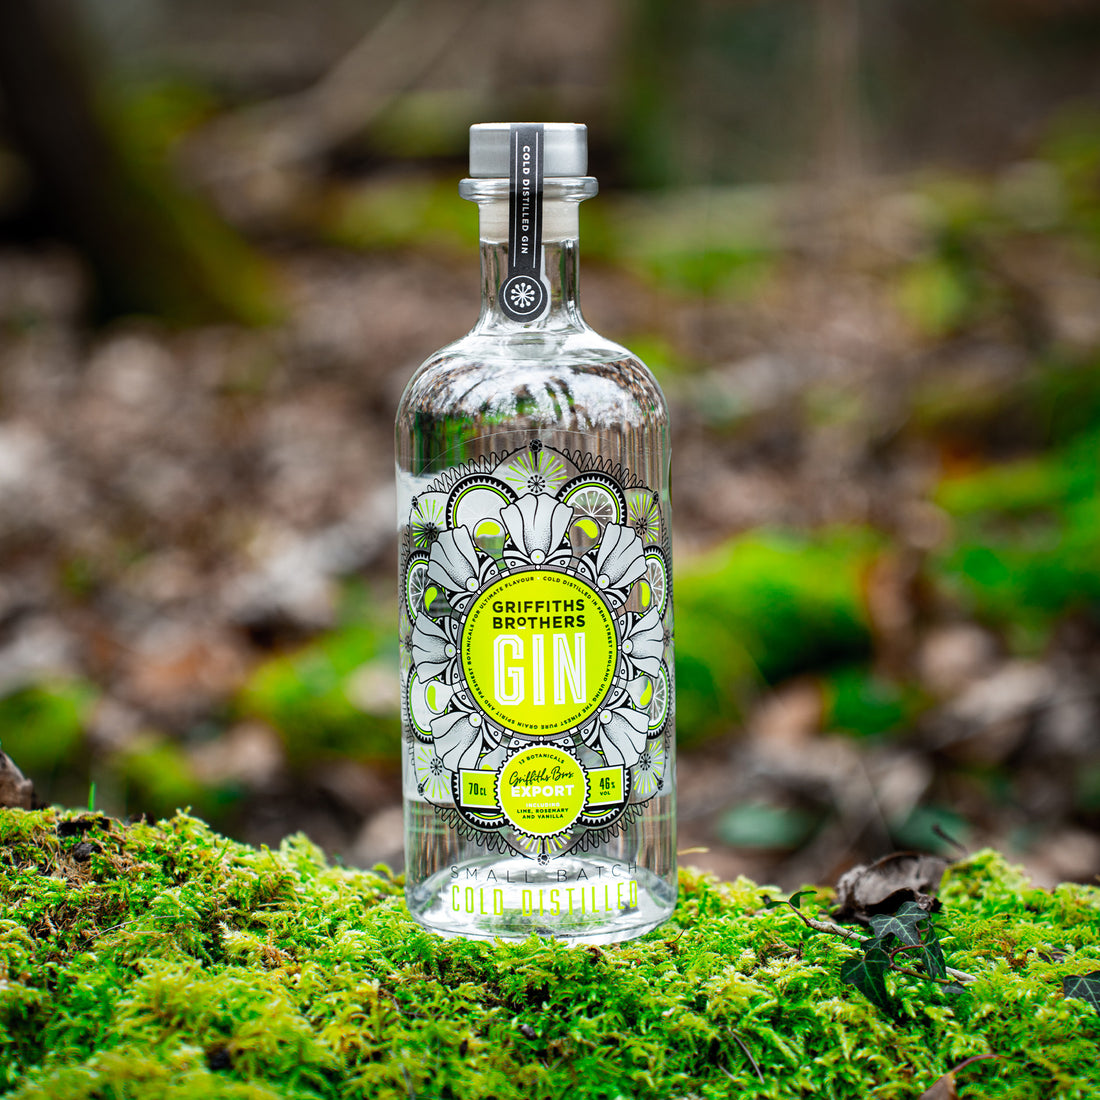 Griffiths Brothers Export Gin (46%)